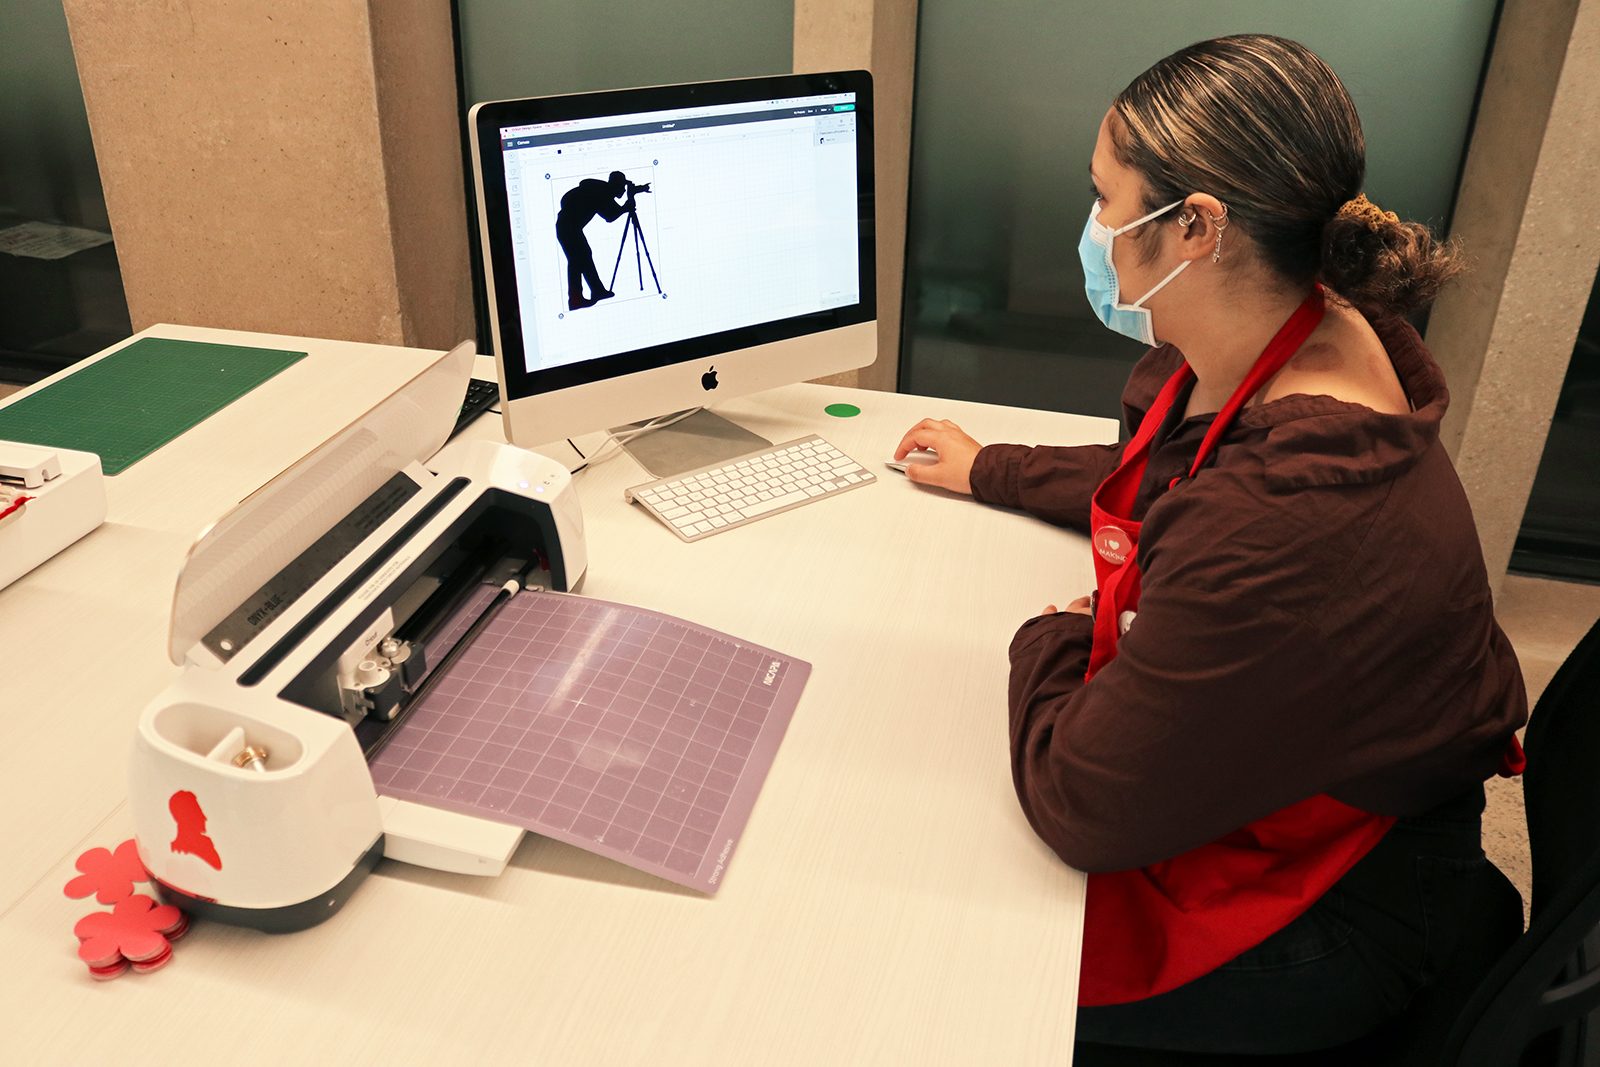 A woman wearing a red apron sits at a white table with her hand on a computer mouse. She looks at a large computer screen with a silhouetted illustration of a person bending over to use a camera on a tripod. Next to the desktop computer is a Cricut cutting machine.